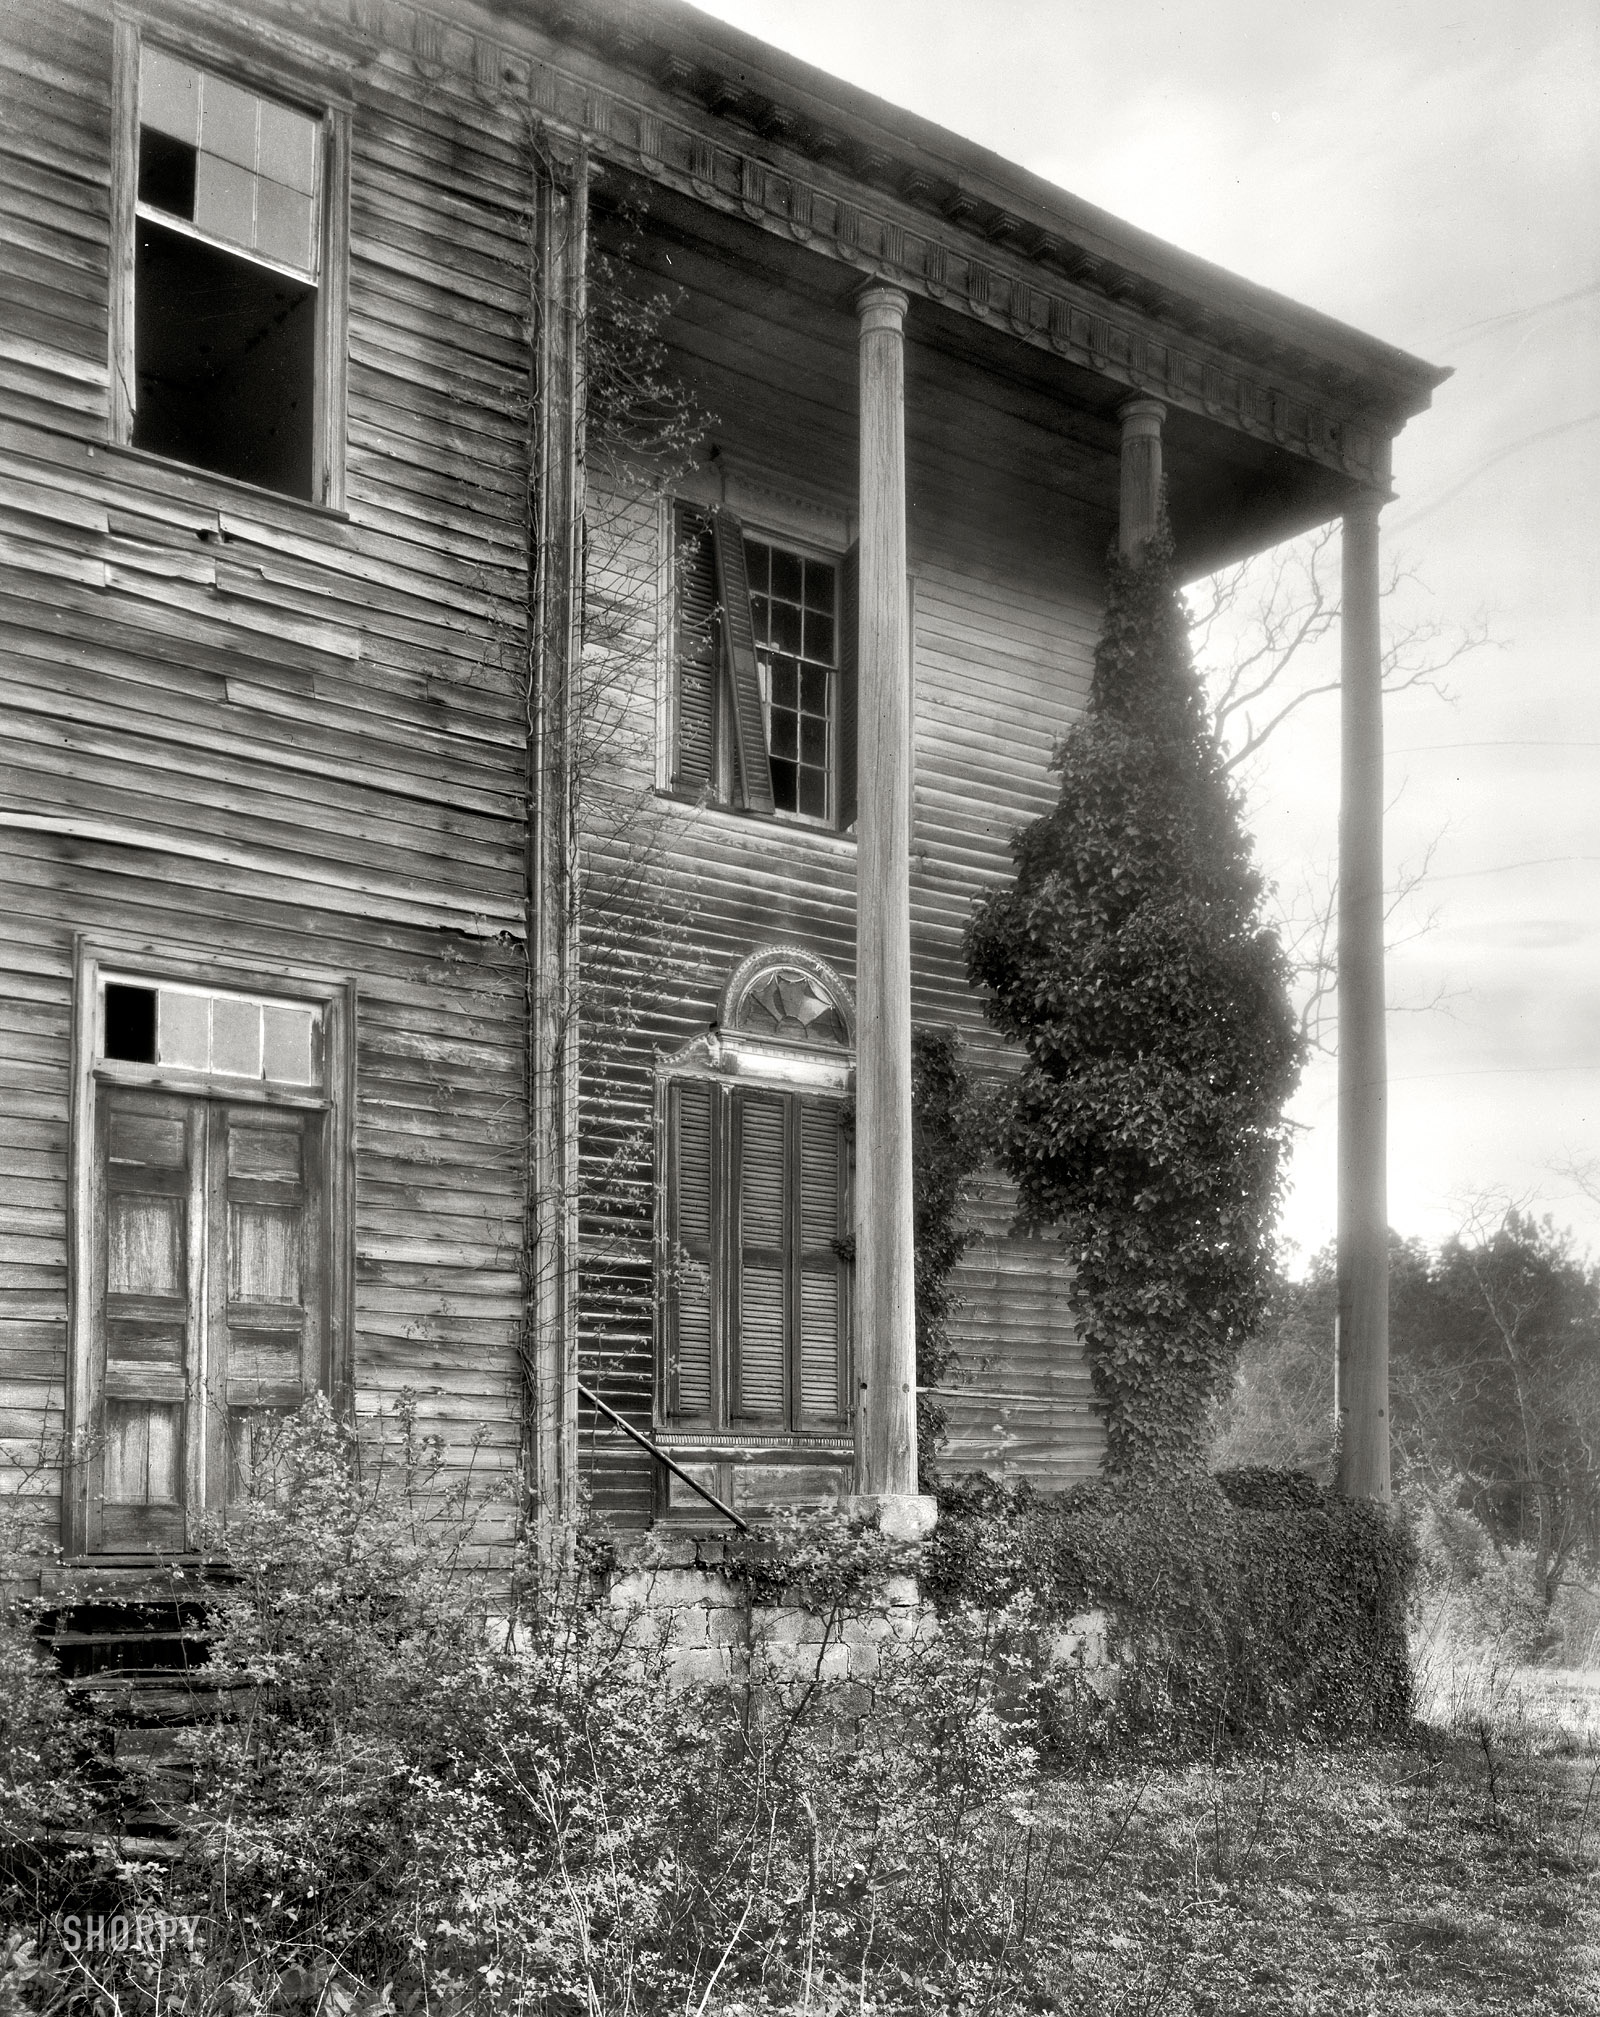 1936. Halifax County, North Carolina. "Prospect Hill, Airlie vicinity. Built 1825 by Wm. Williams Thorne." 8x10 inch safety negative by Frances Benjamin Johnston for the Carnegie Survey of the Architecture of the South. View full size.